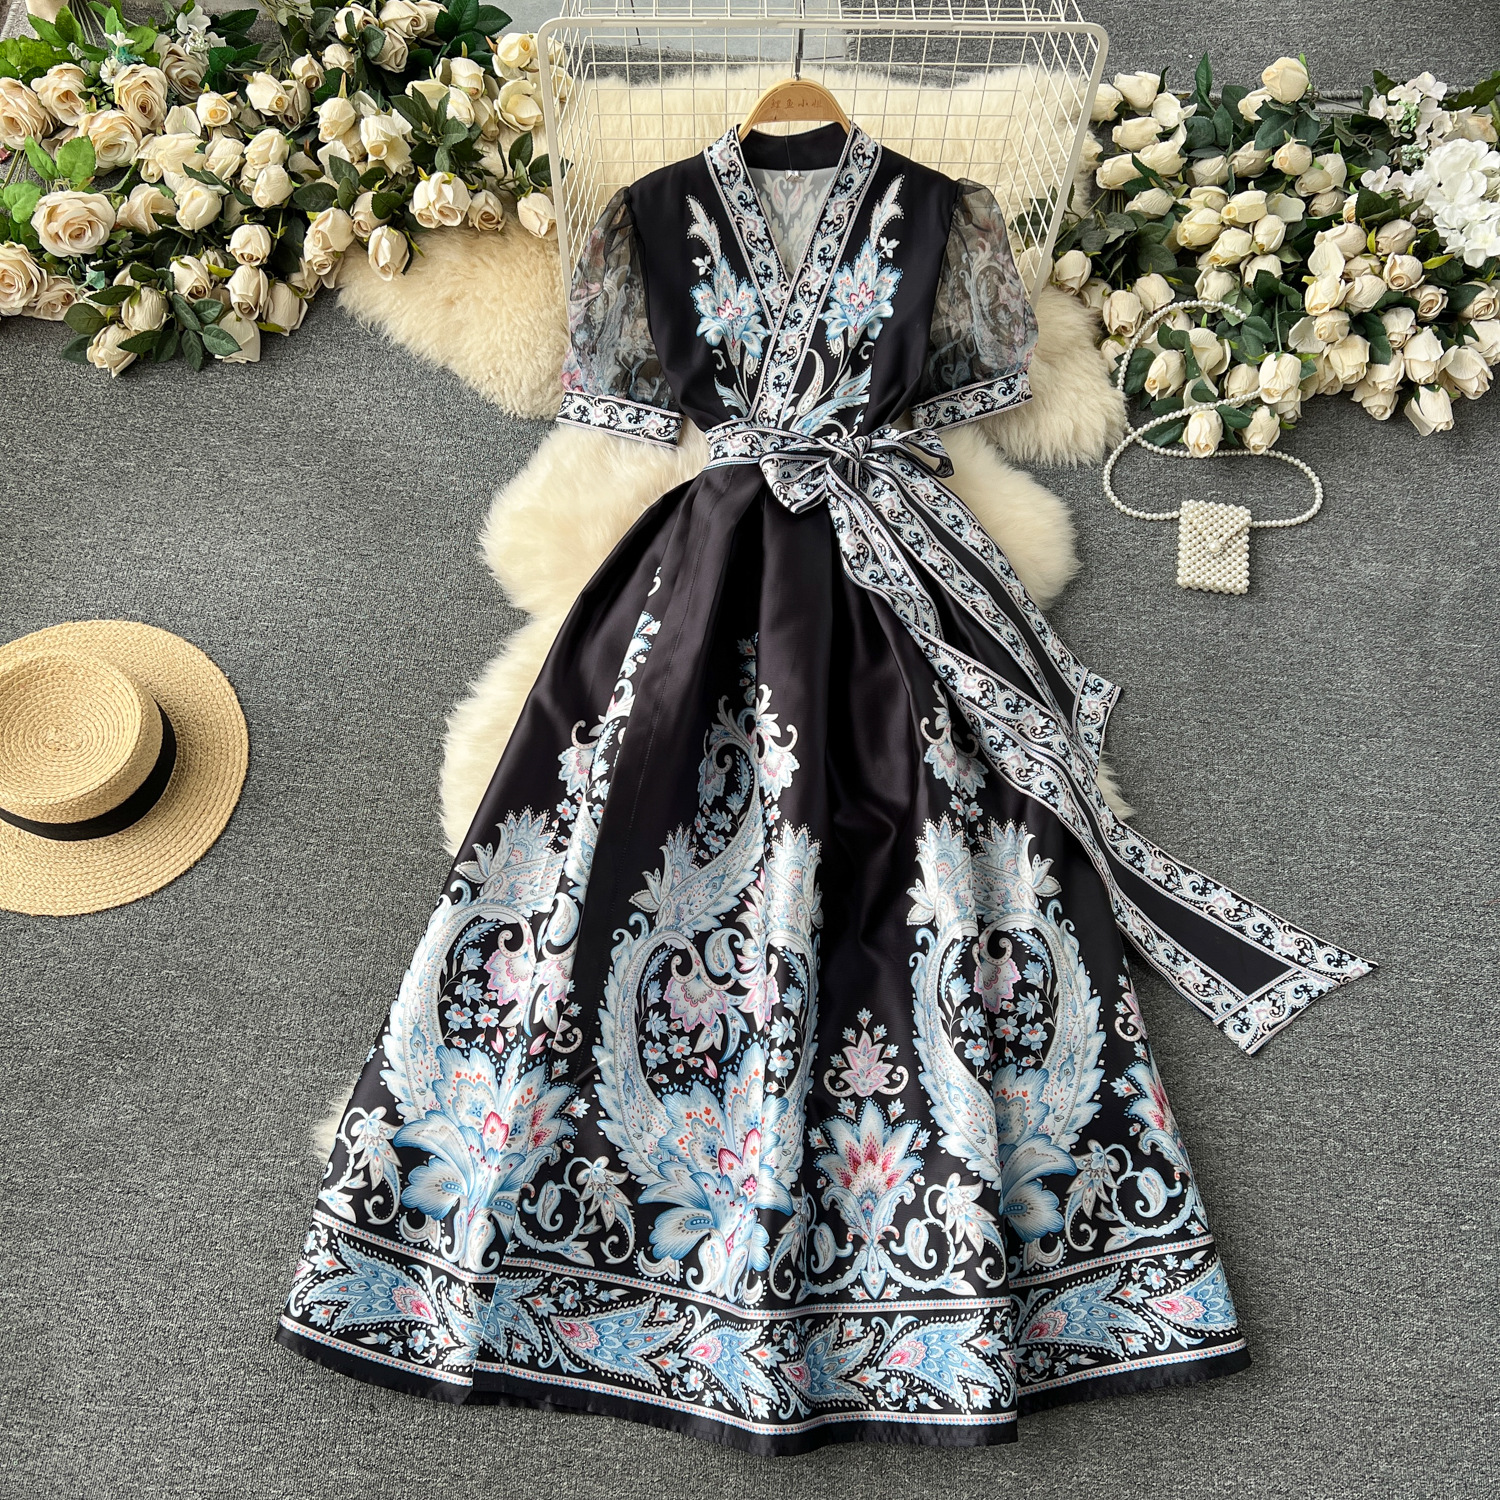 Palace style dress design with retro print and tie up waist for slimming effect. Large hem for a high-end and elegant dress